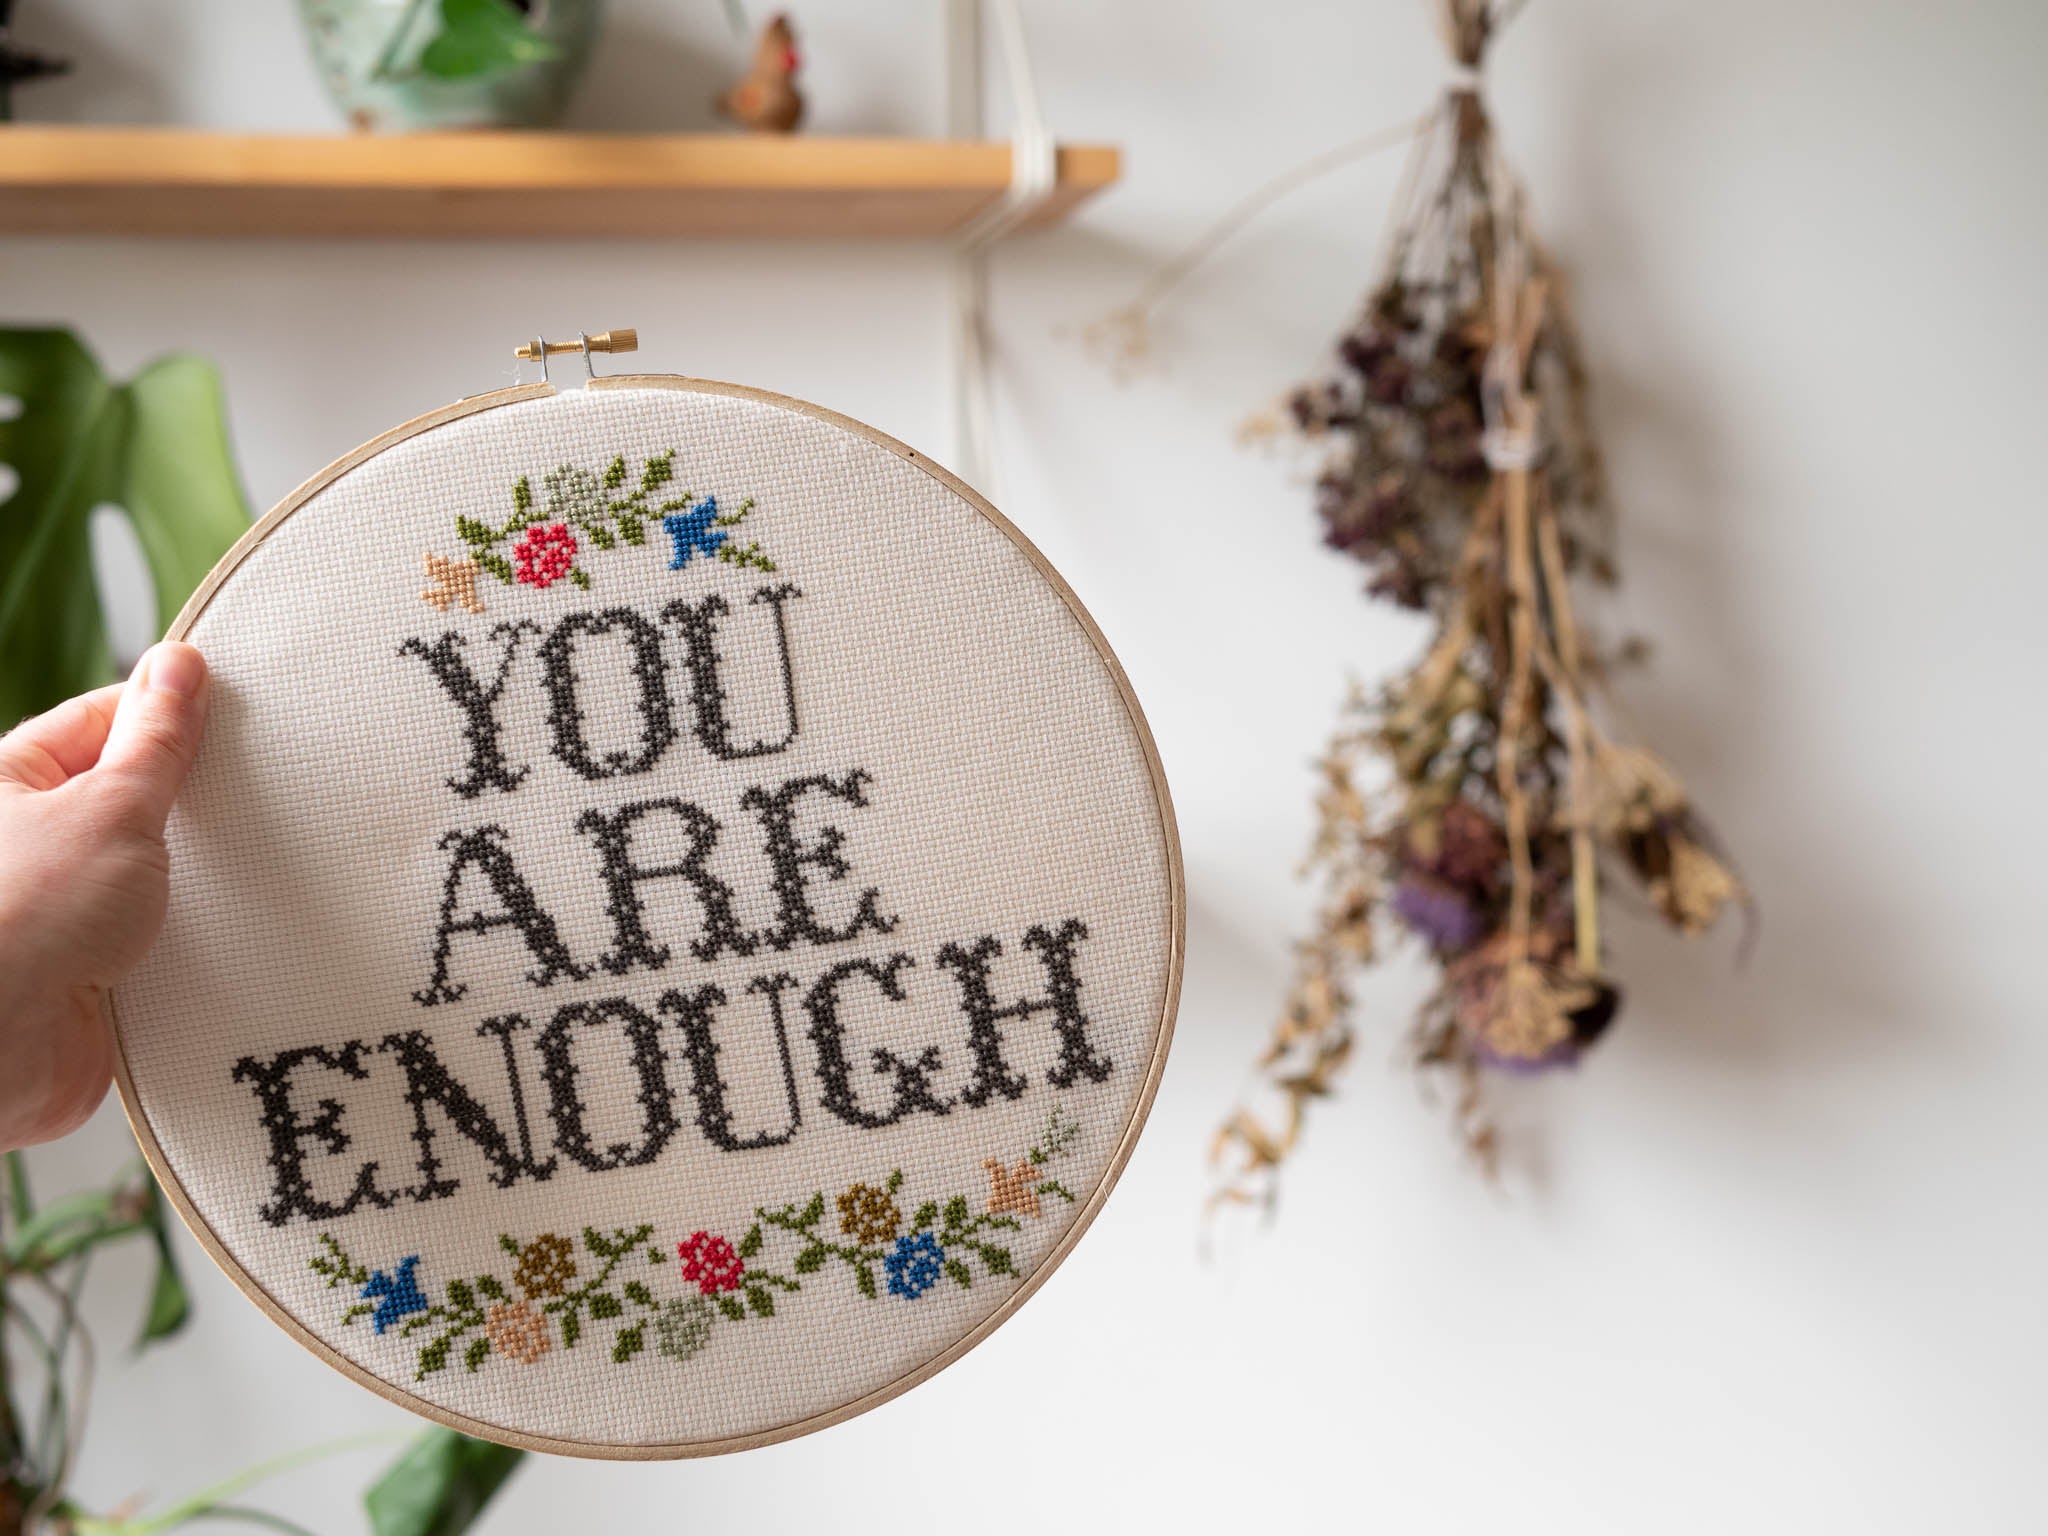 Cross stitch for beginners: a handy guide to get you started